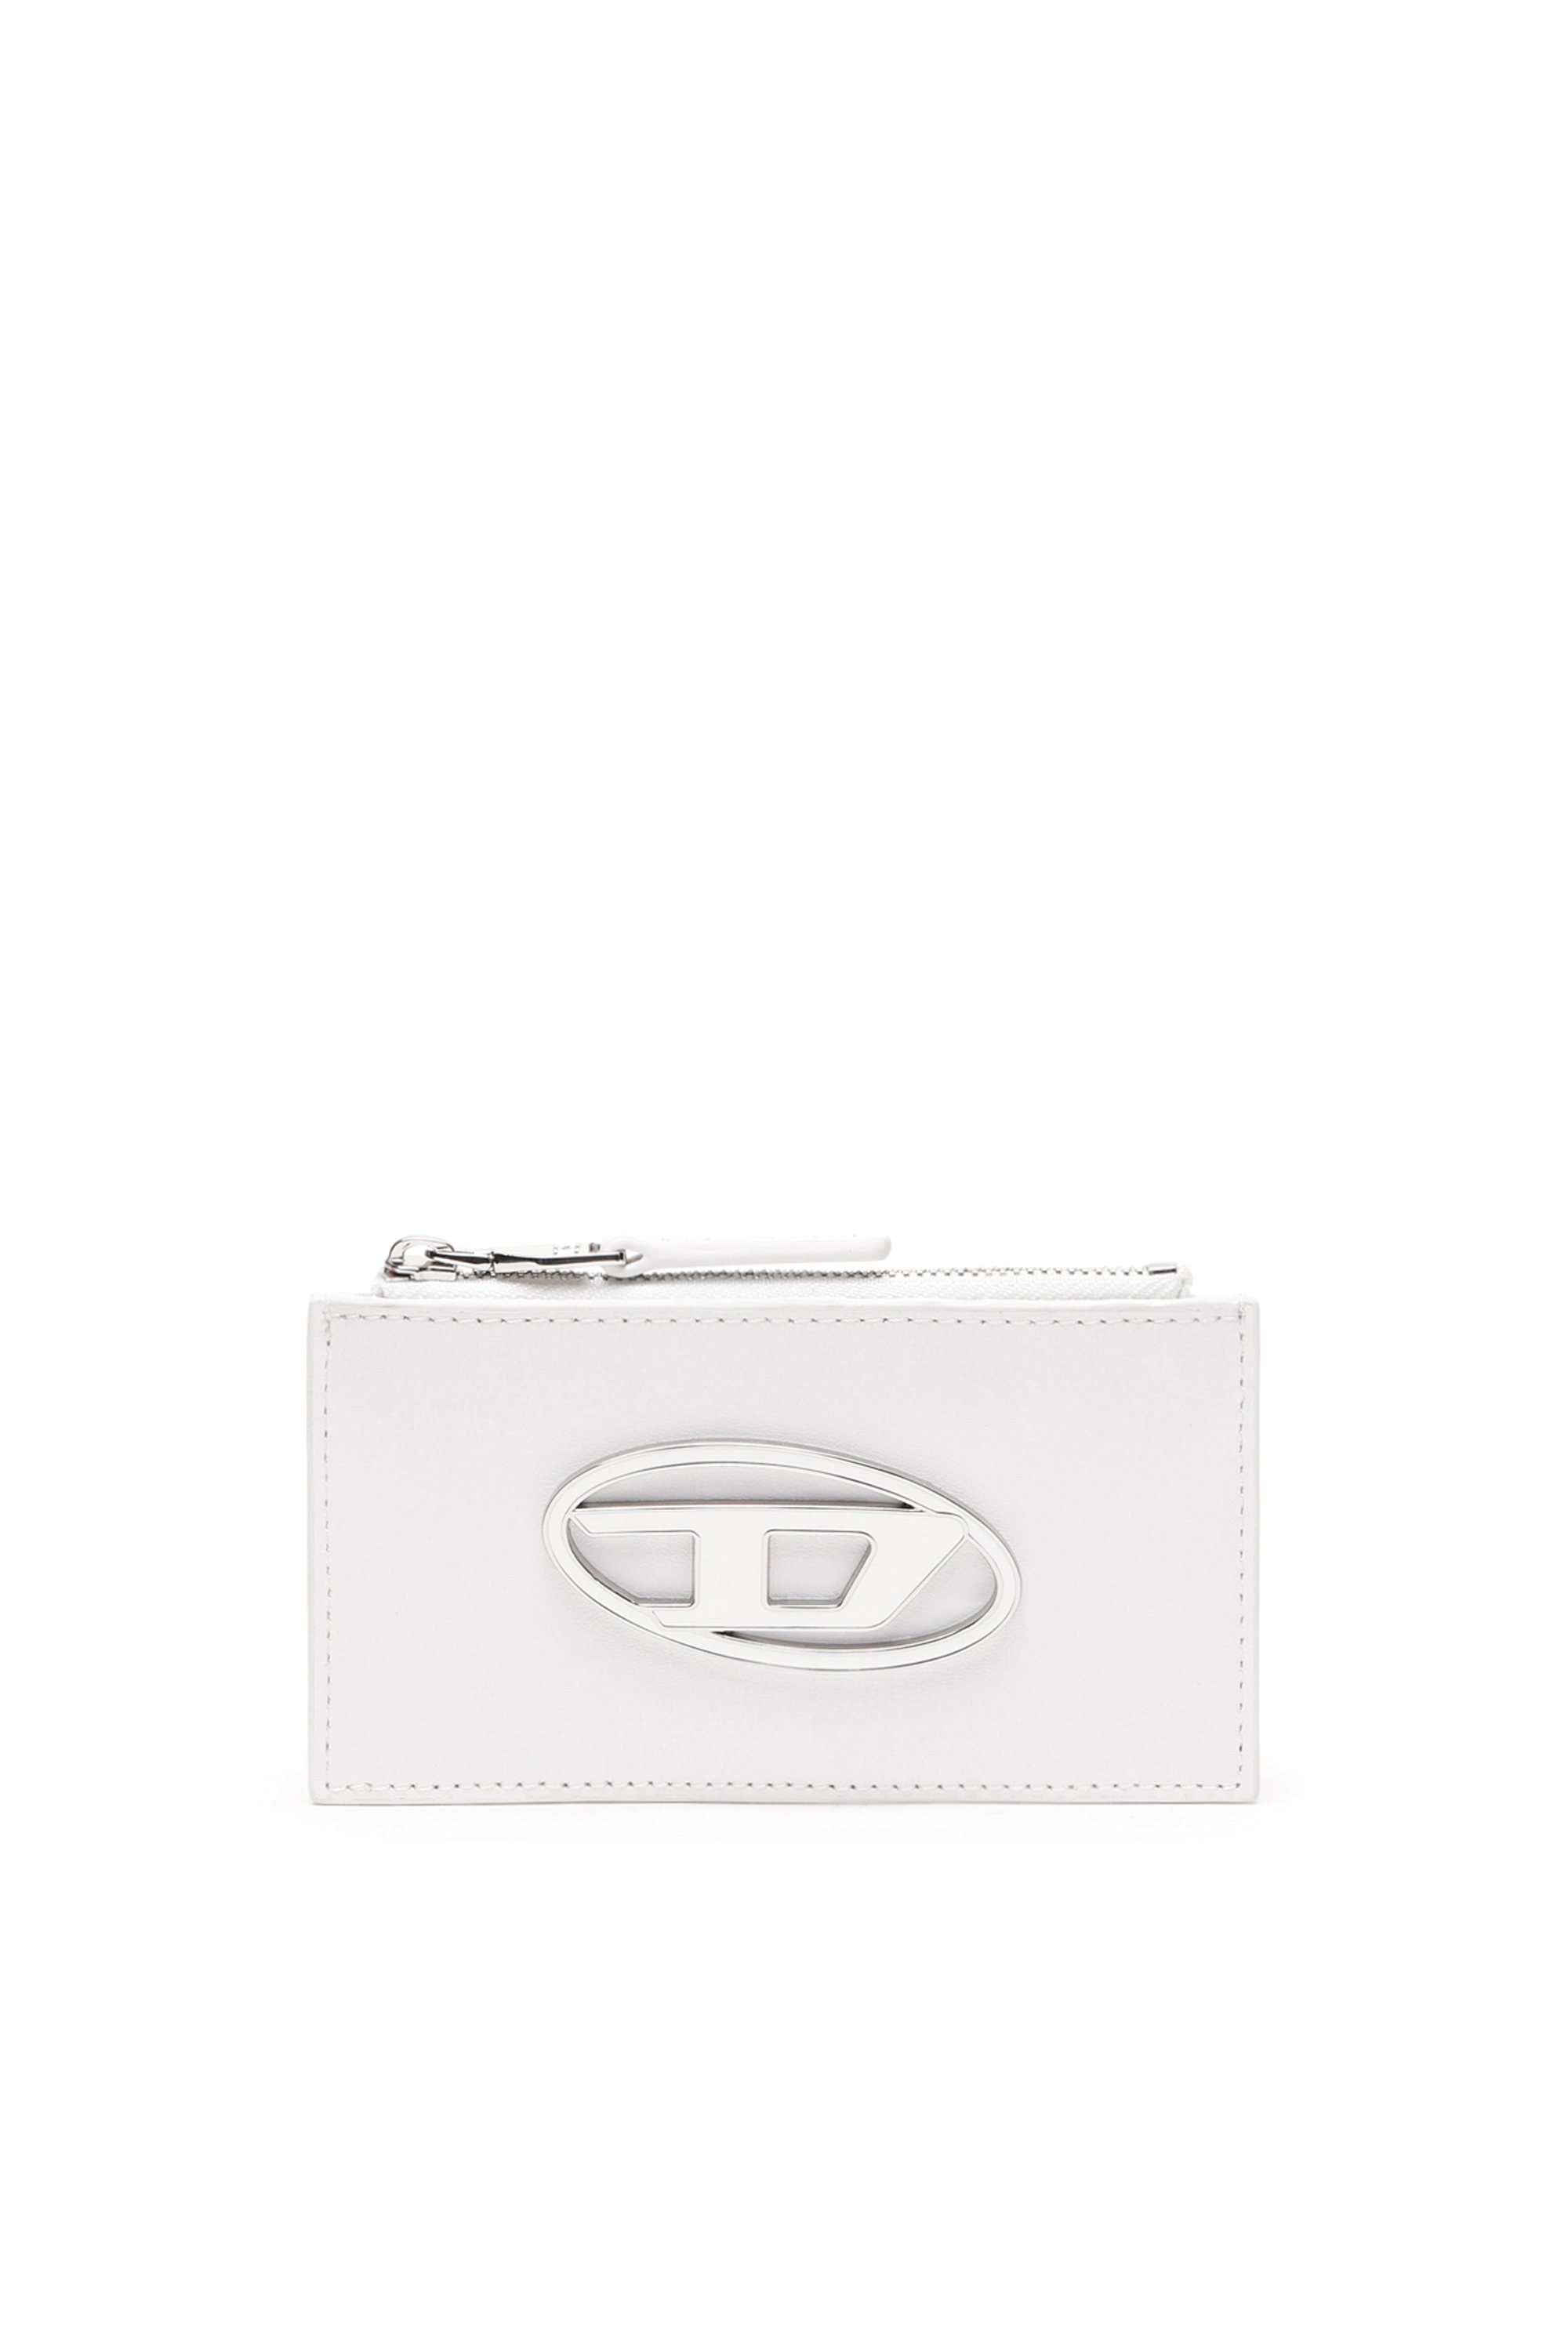 Diesel - PAOULINA, Bianco - Image 1